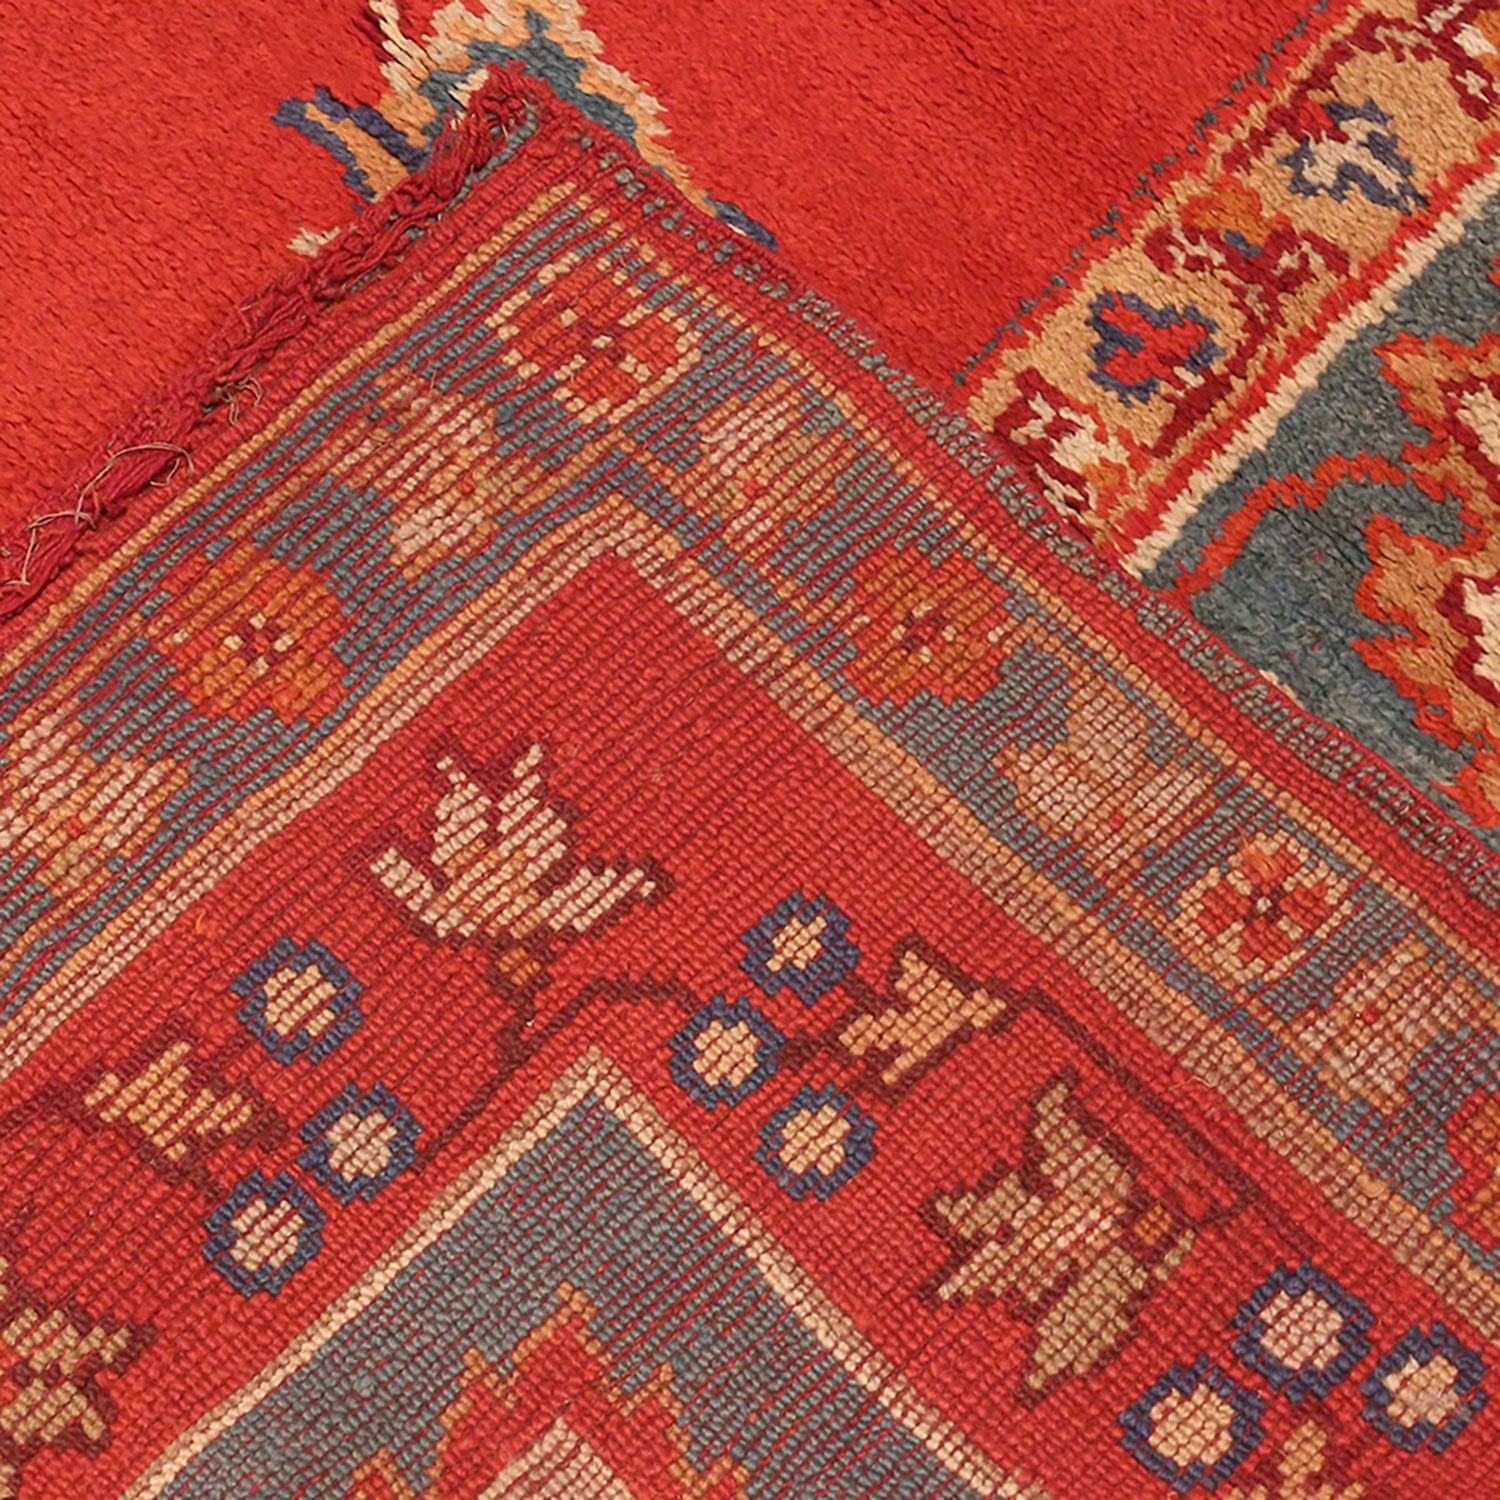 Close-up of a vibrant, handcrafted Oriental carpet with intricate designs.